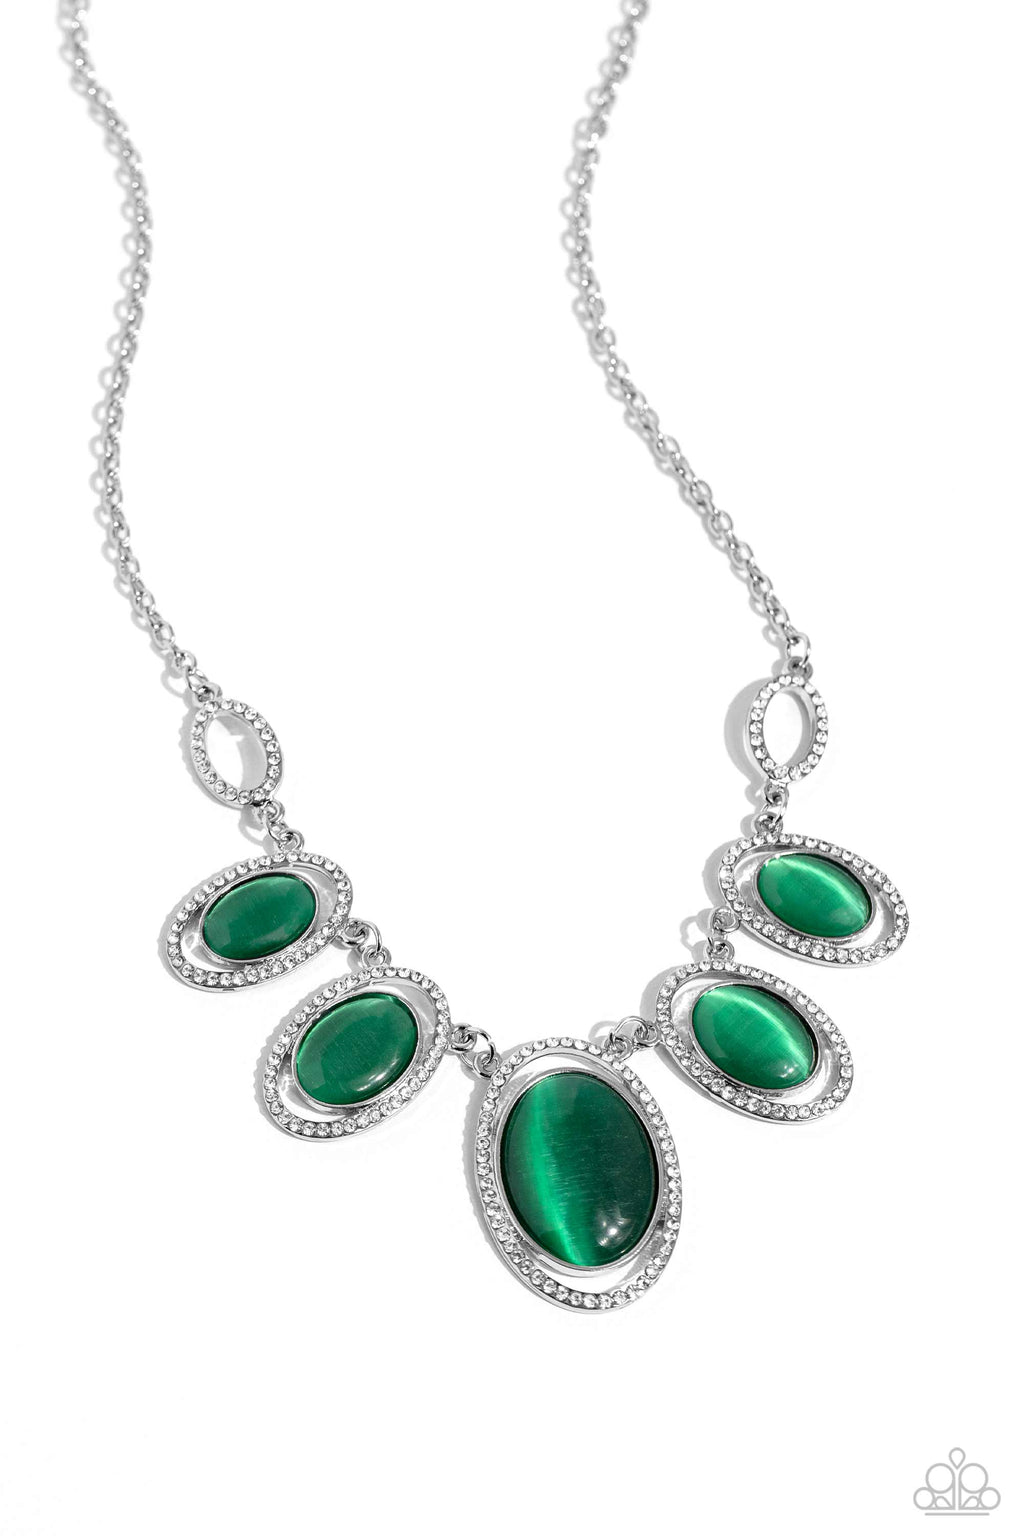 five-dollar-jewelry-a-beam-come-true-green-necklace-paparazzi-accessories